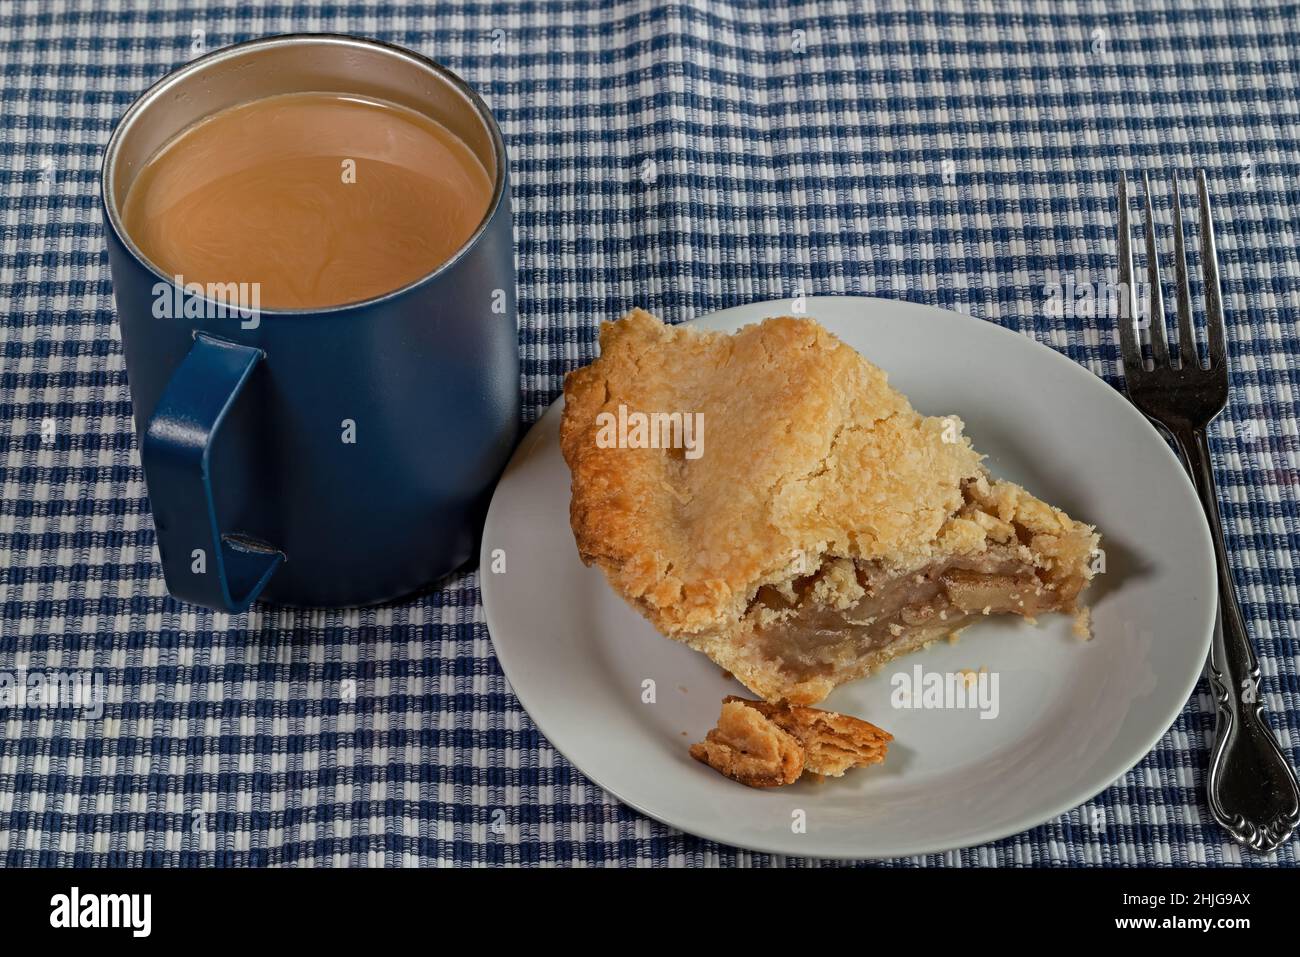 Fresh baked double crust apple pie with a cup of brewed coffee. Ingredients of the pie include tart green apples, sugar, cinnamon, flour, Stock Photo